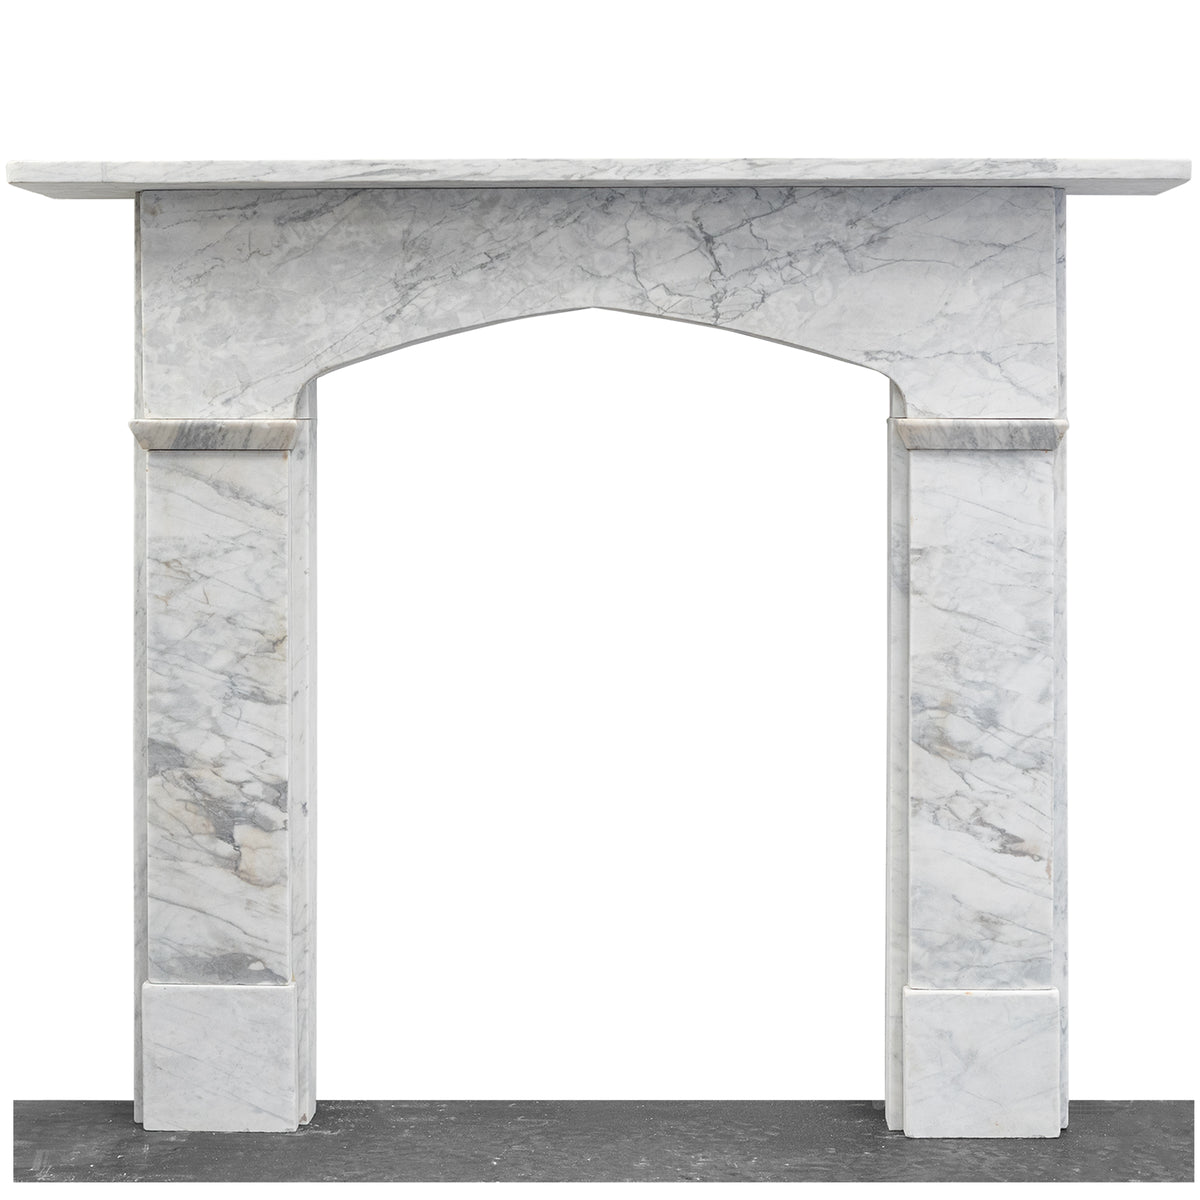 Antique Georgian Marble Fireplace Surround with Gothic Arch | The Architectural Forum